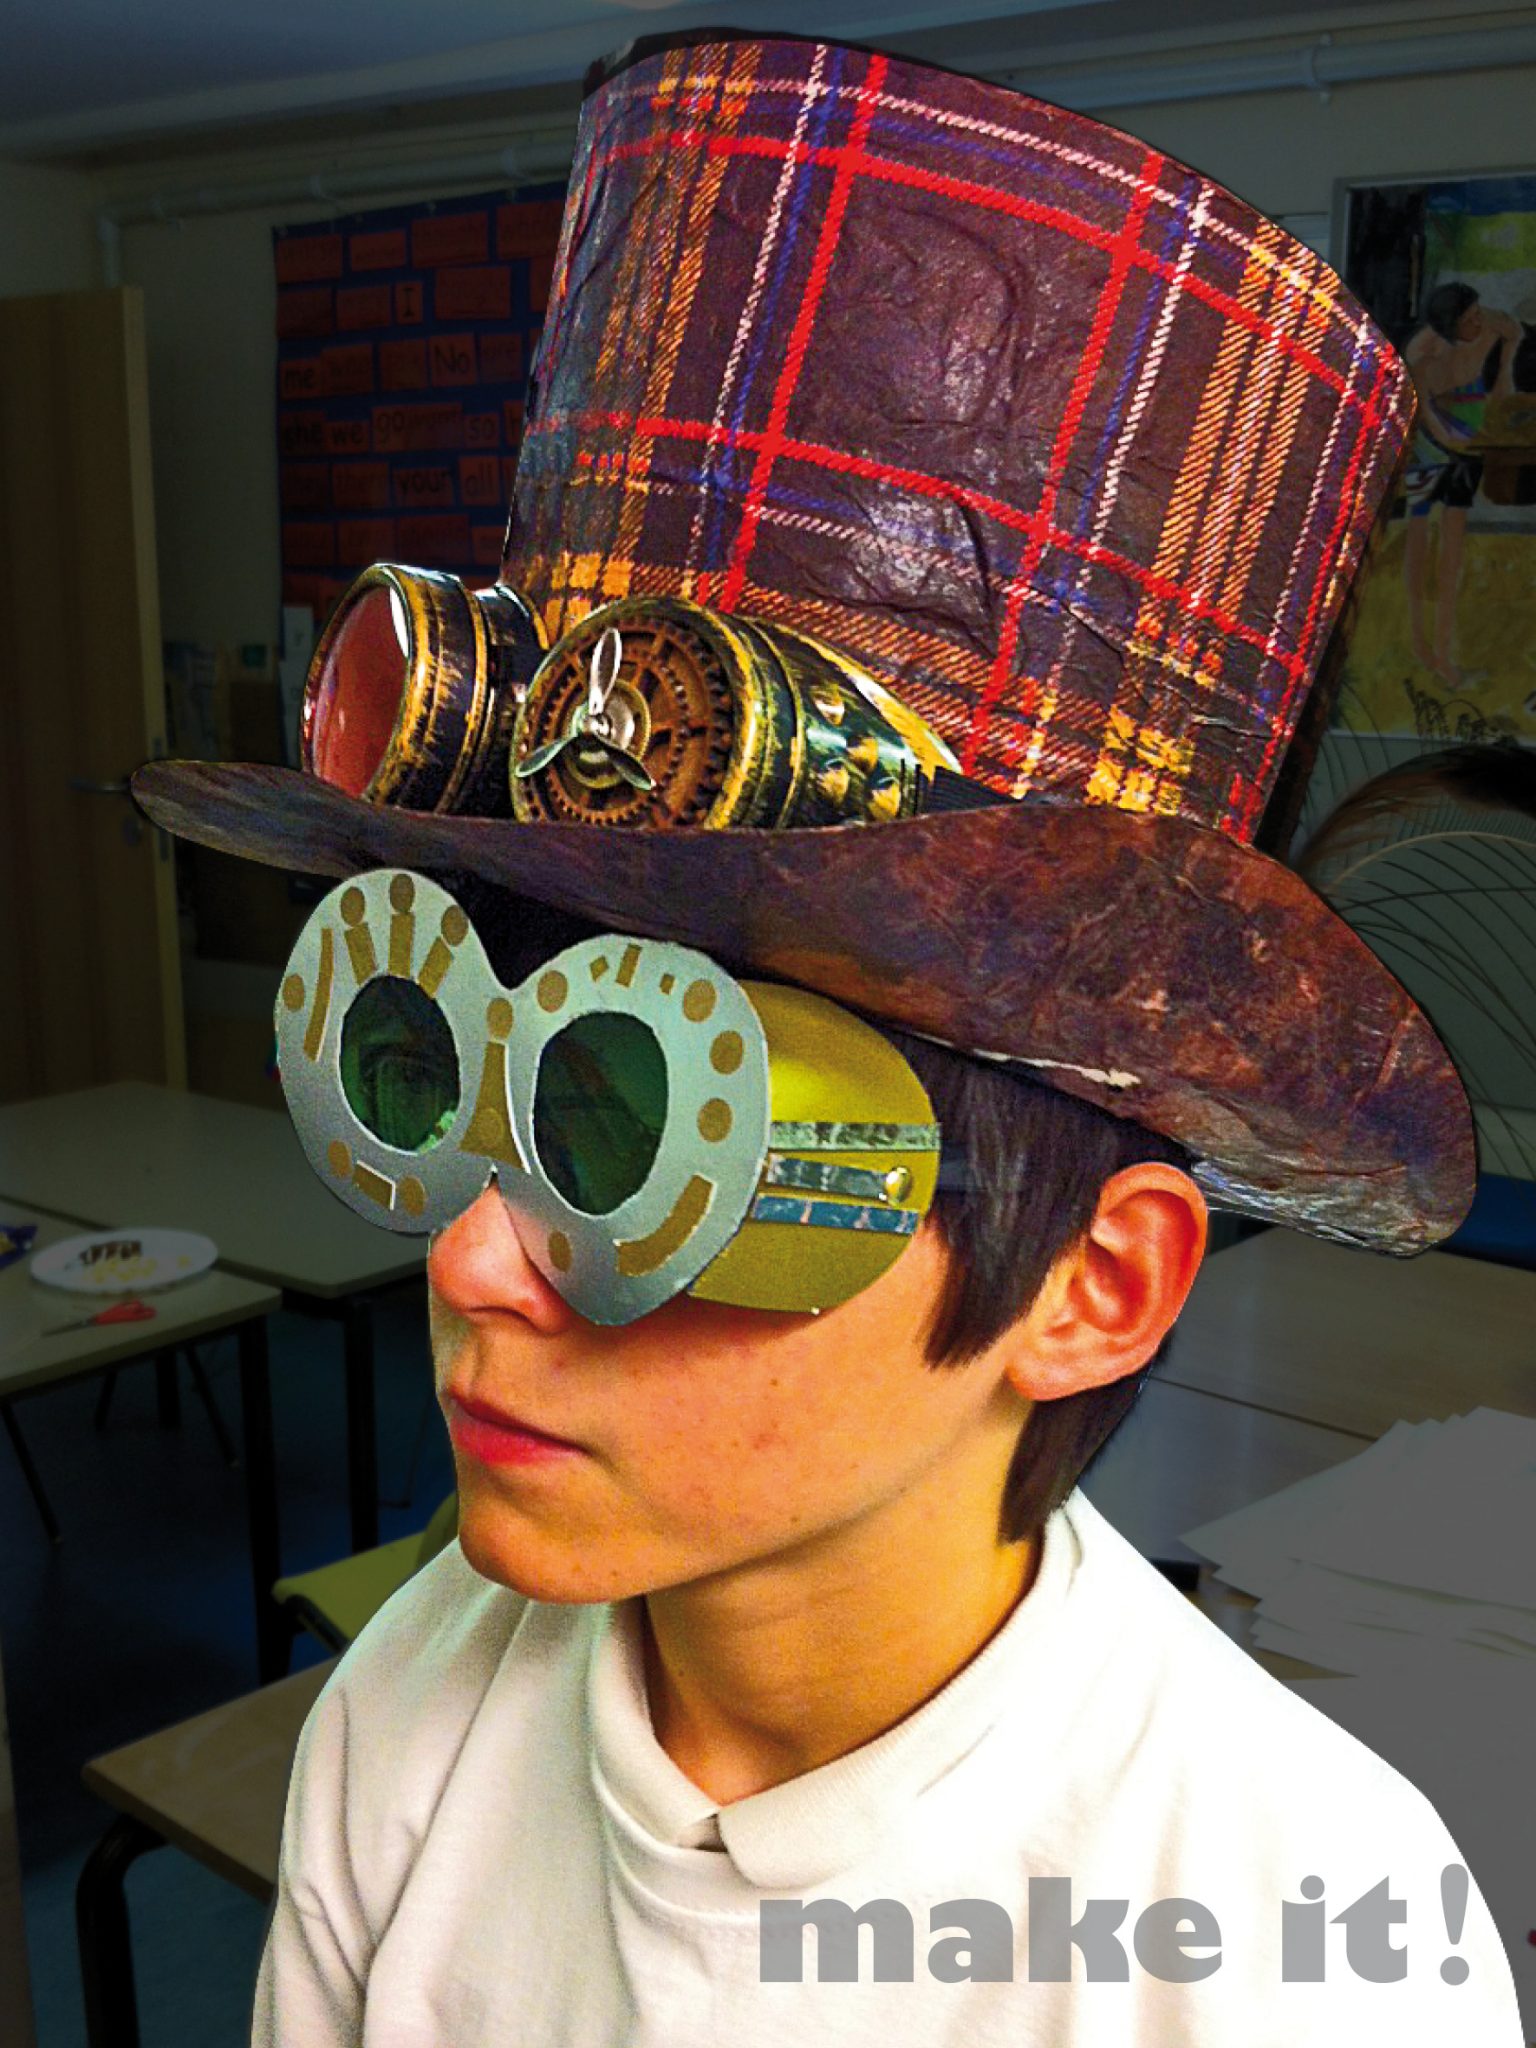 Make It! Half term workshops – Cool halloween hats - Discover Frome